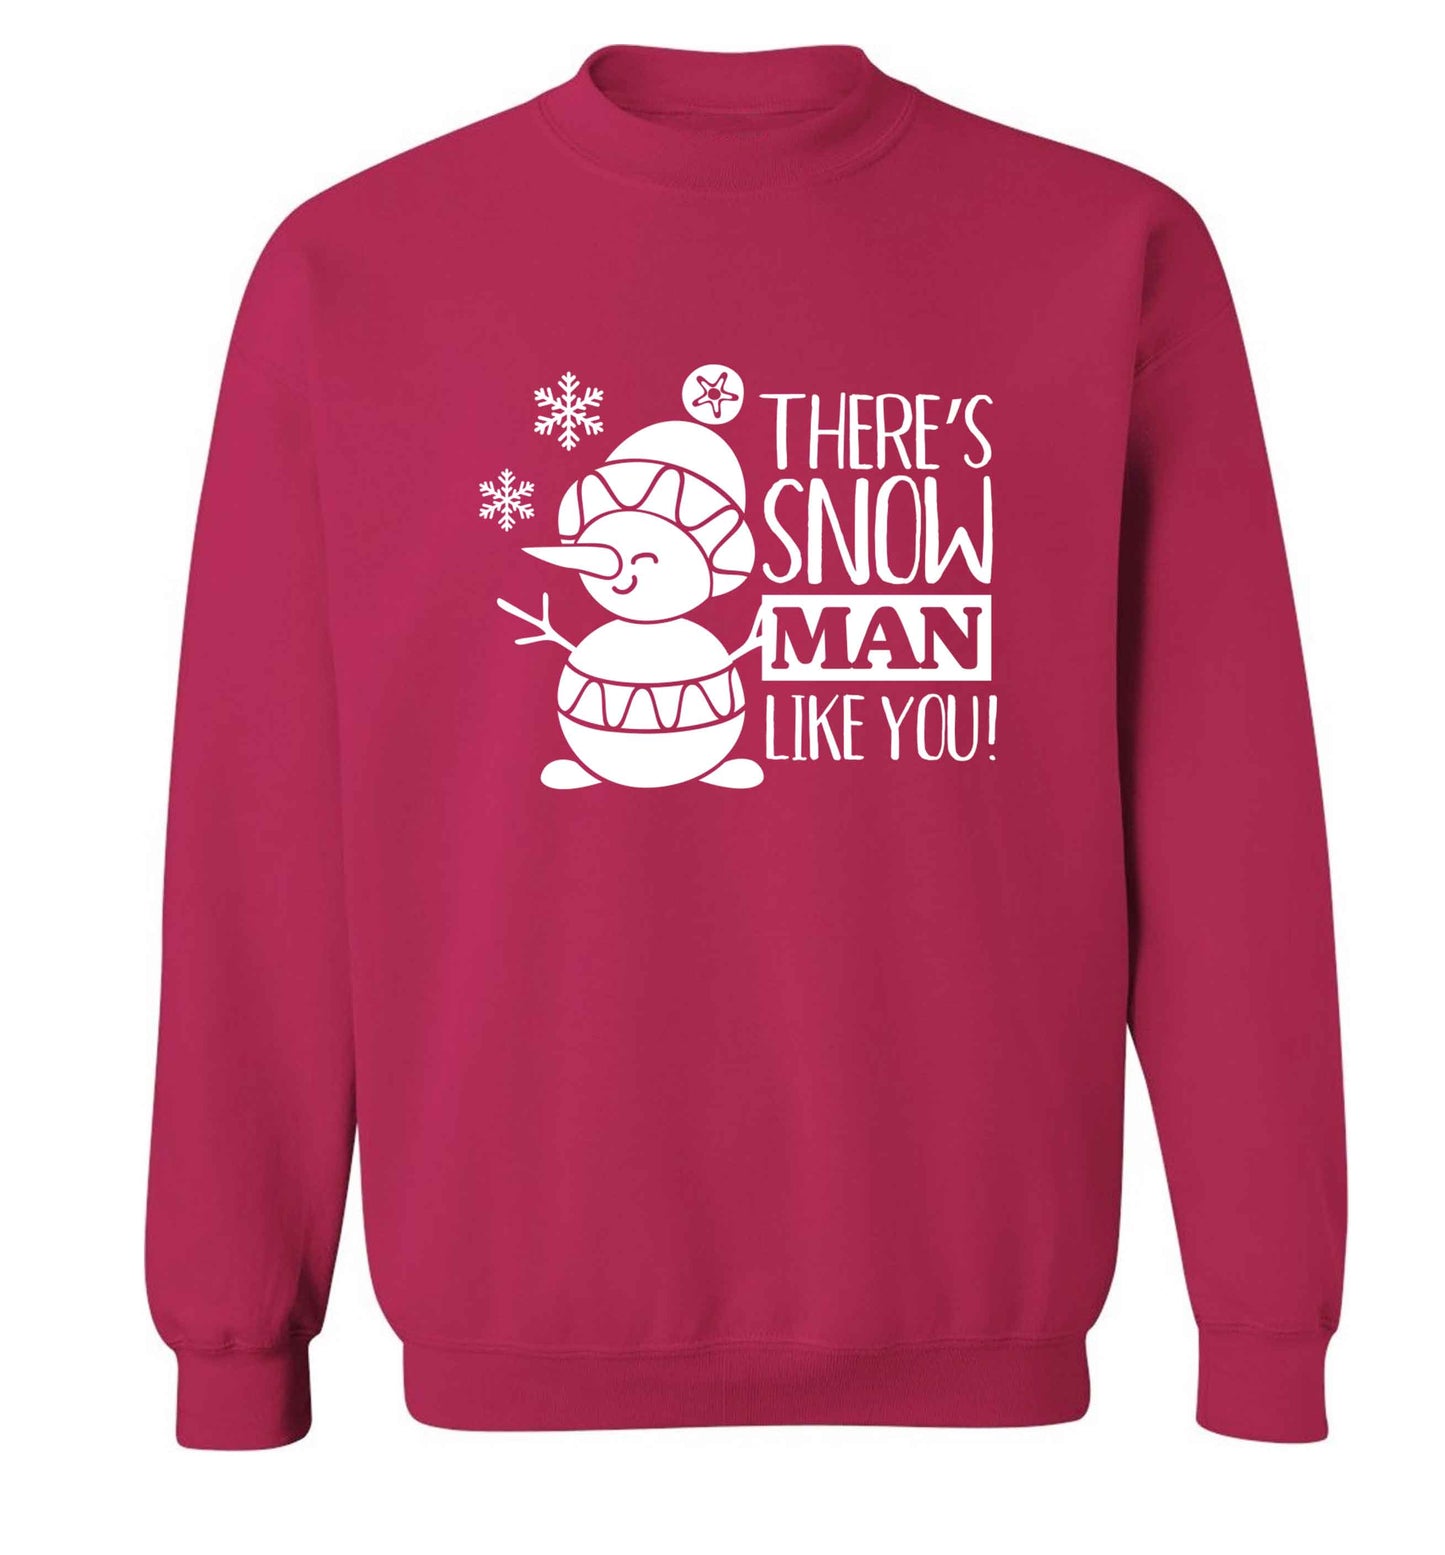 There's snow man like you adult's unisex pink sweater 2XL